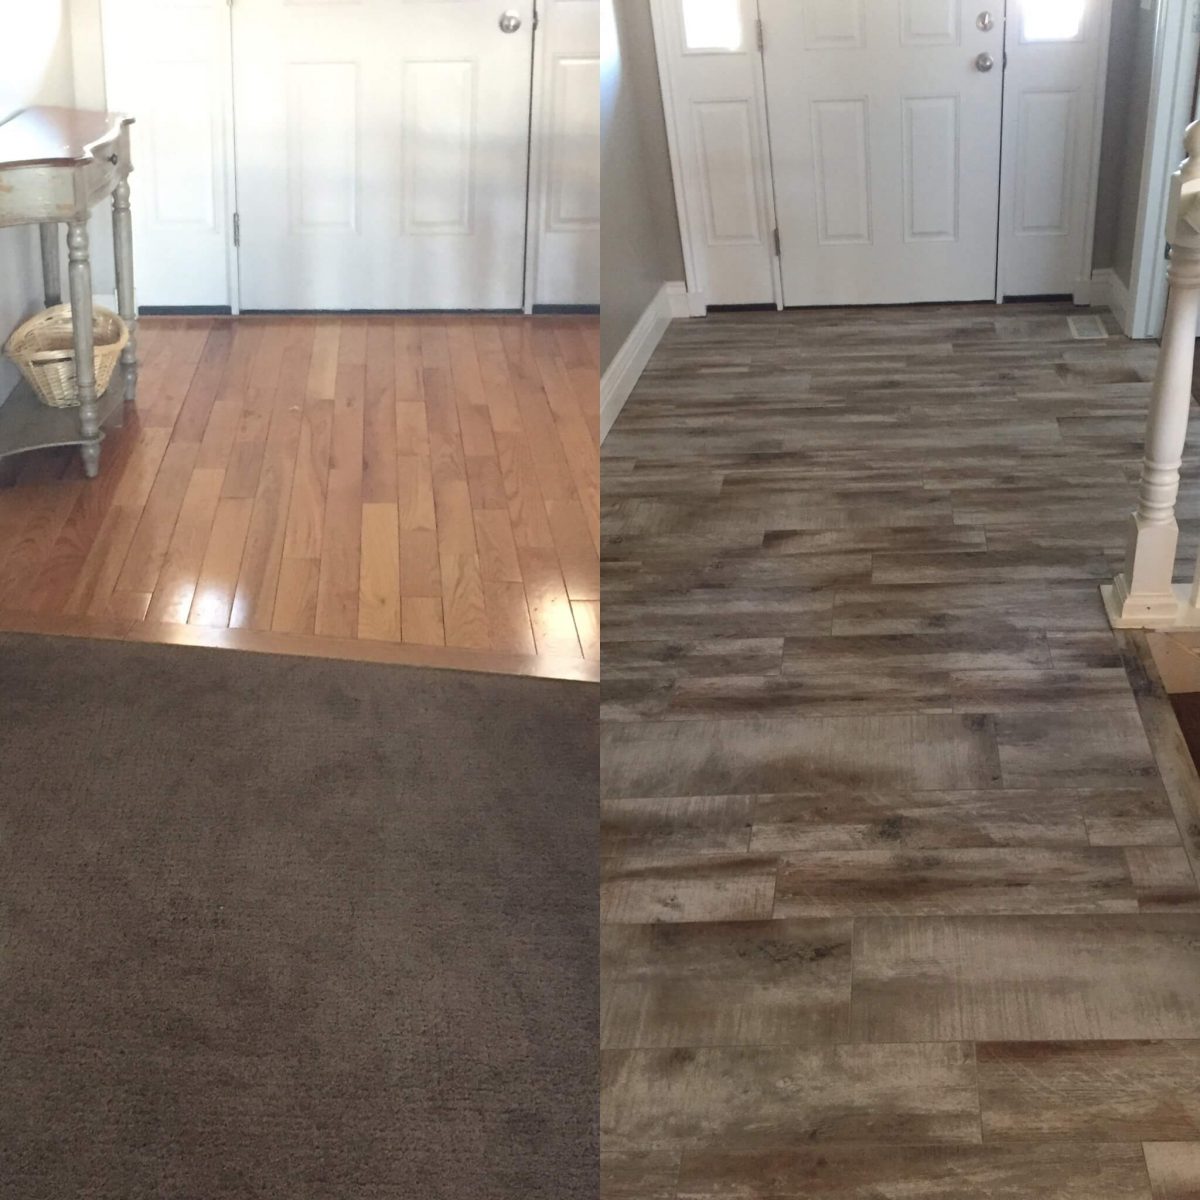 Flooring Before and After Reveal-Wood Looking Tile - 365 Days of Slow